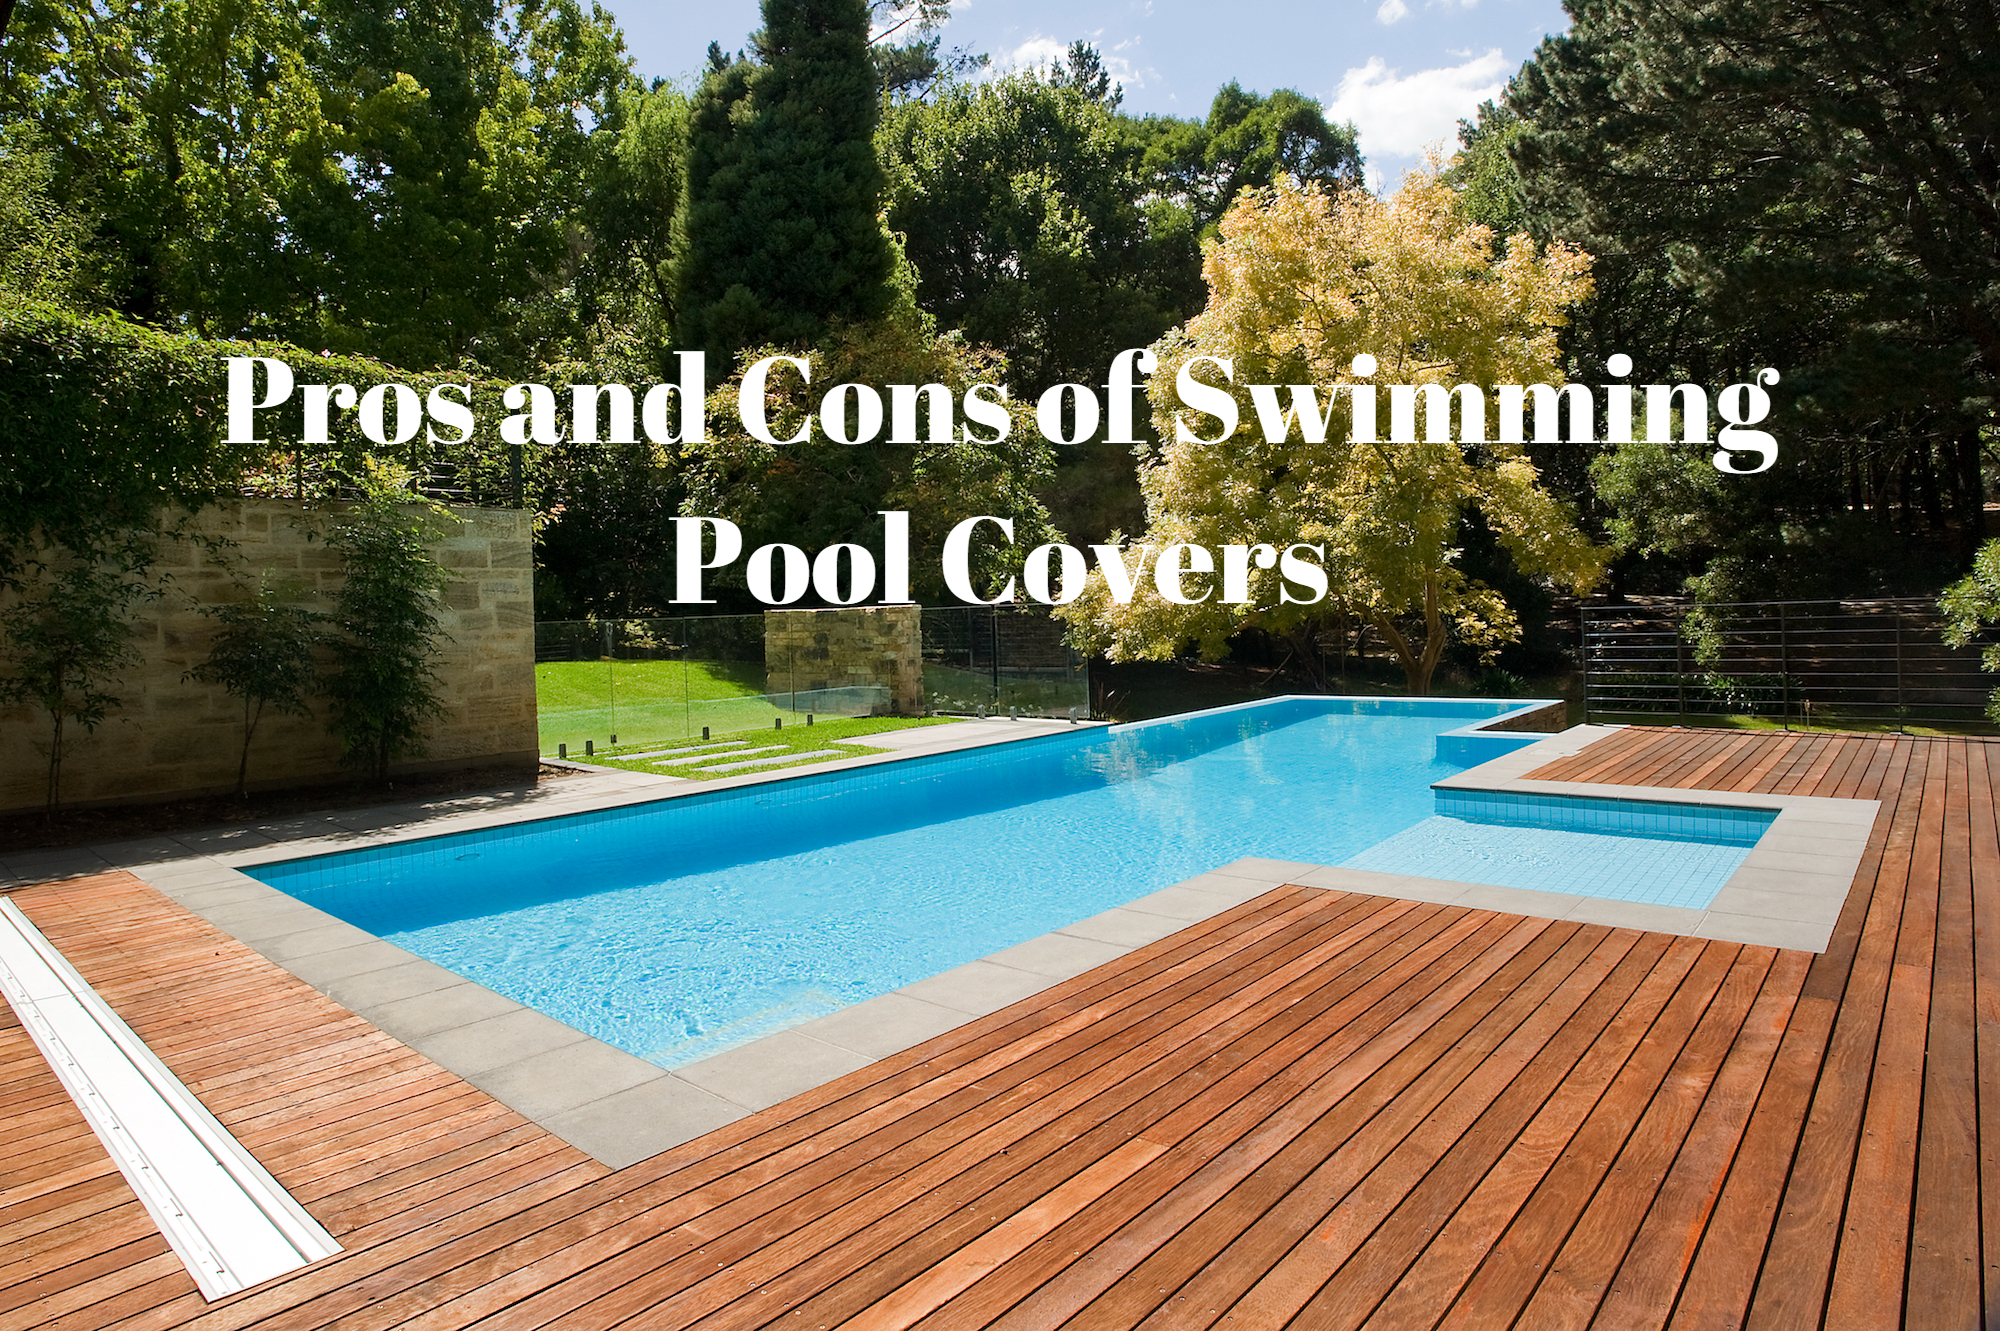 Pros and Cons of Swimming Pool Covers